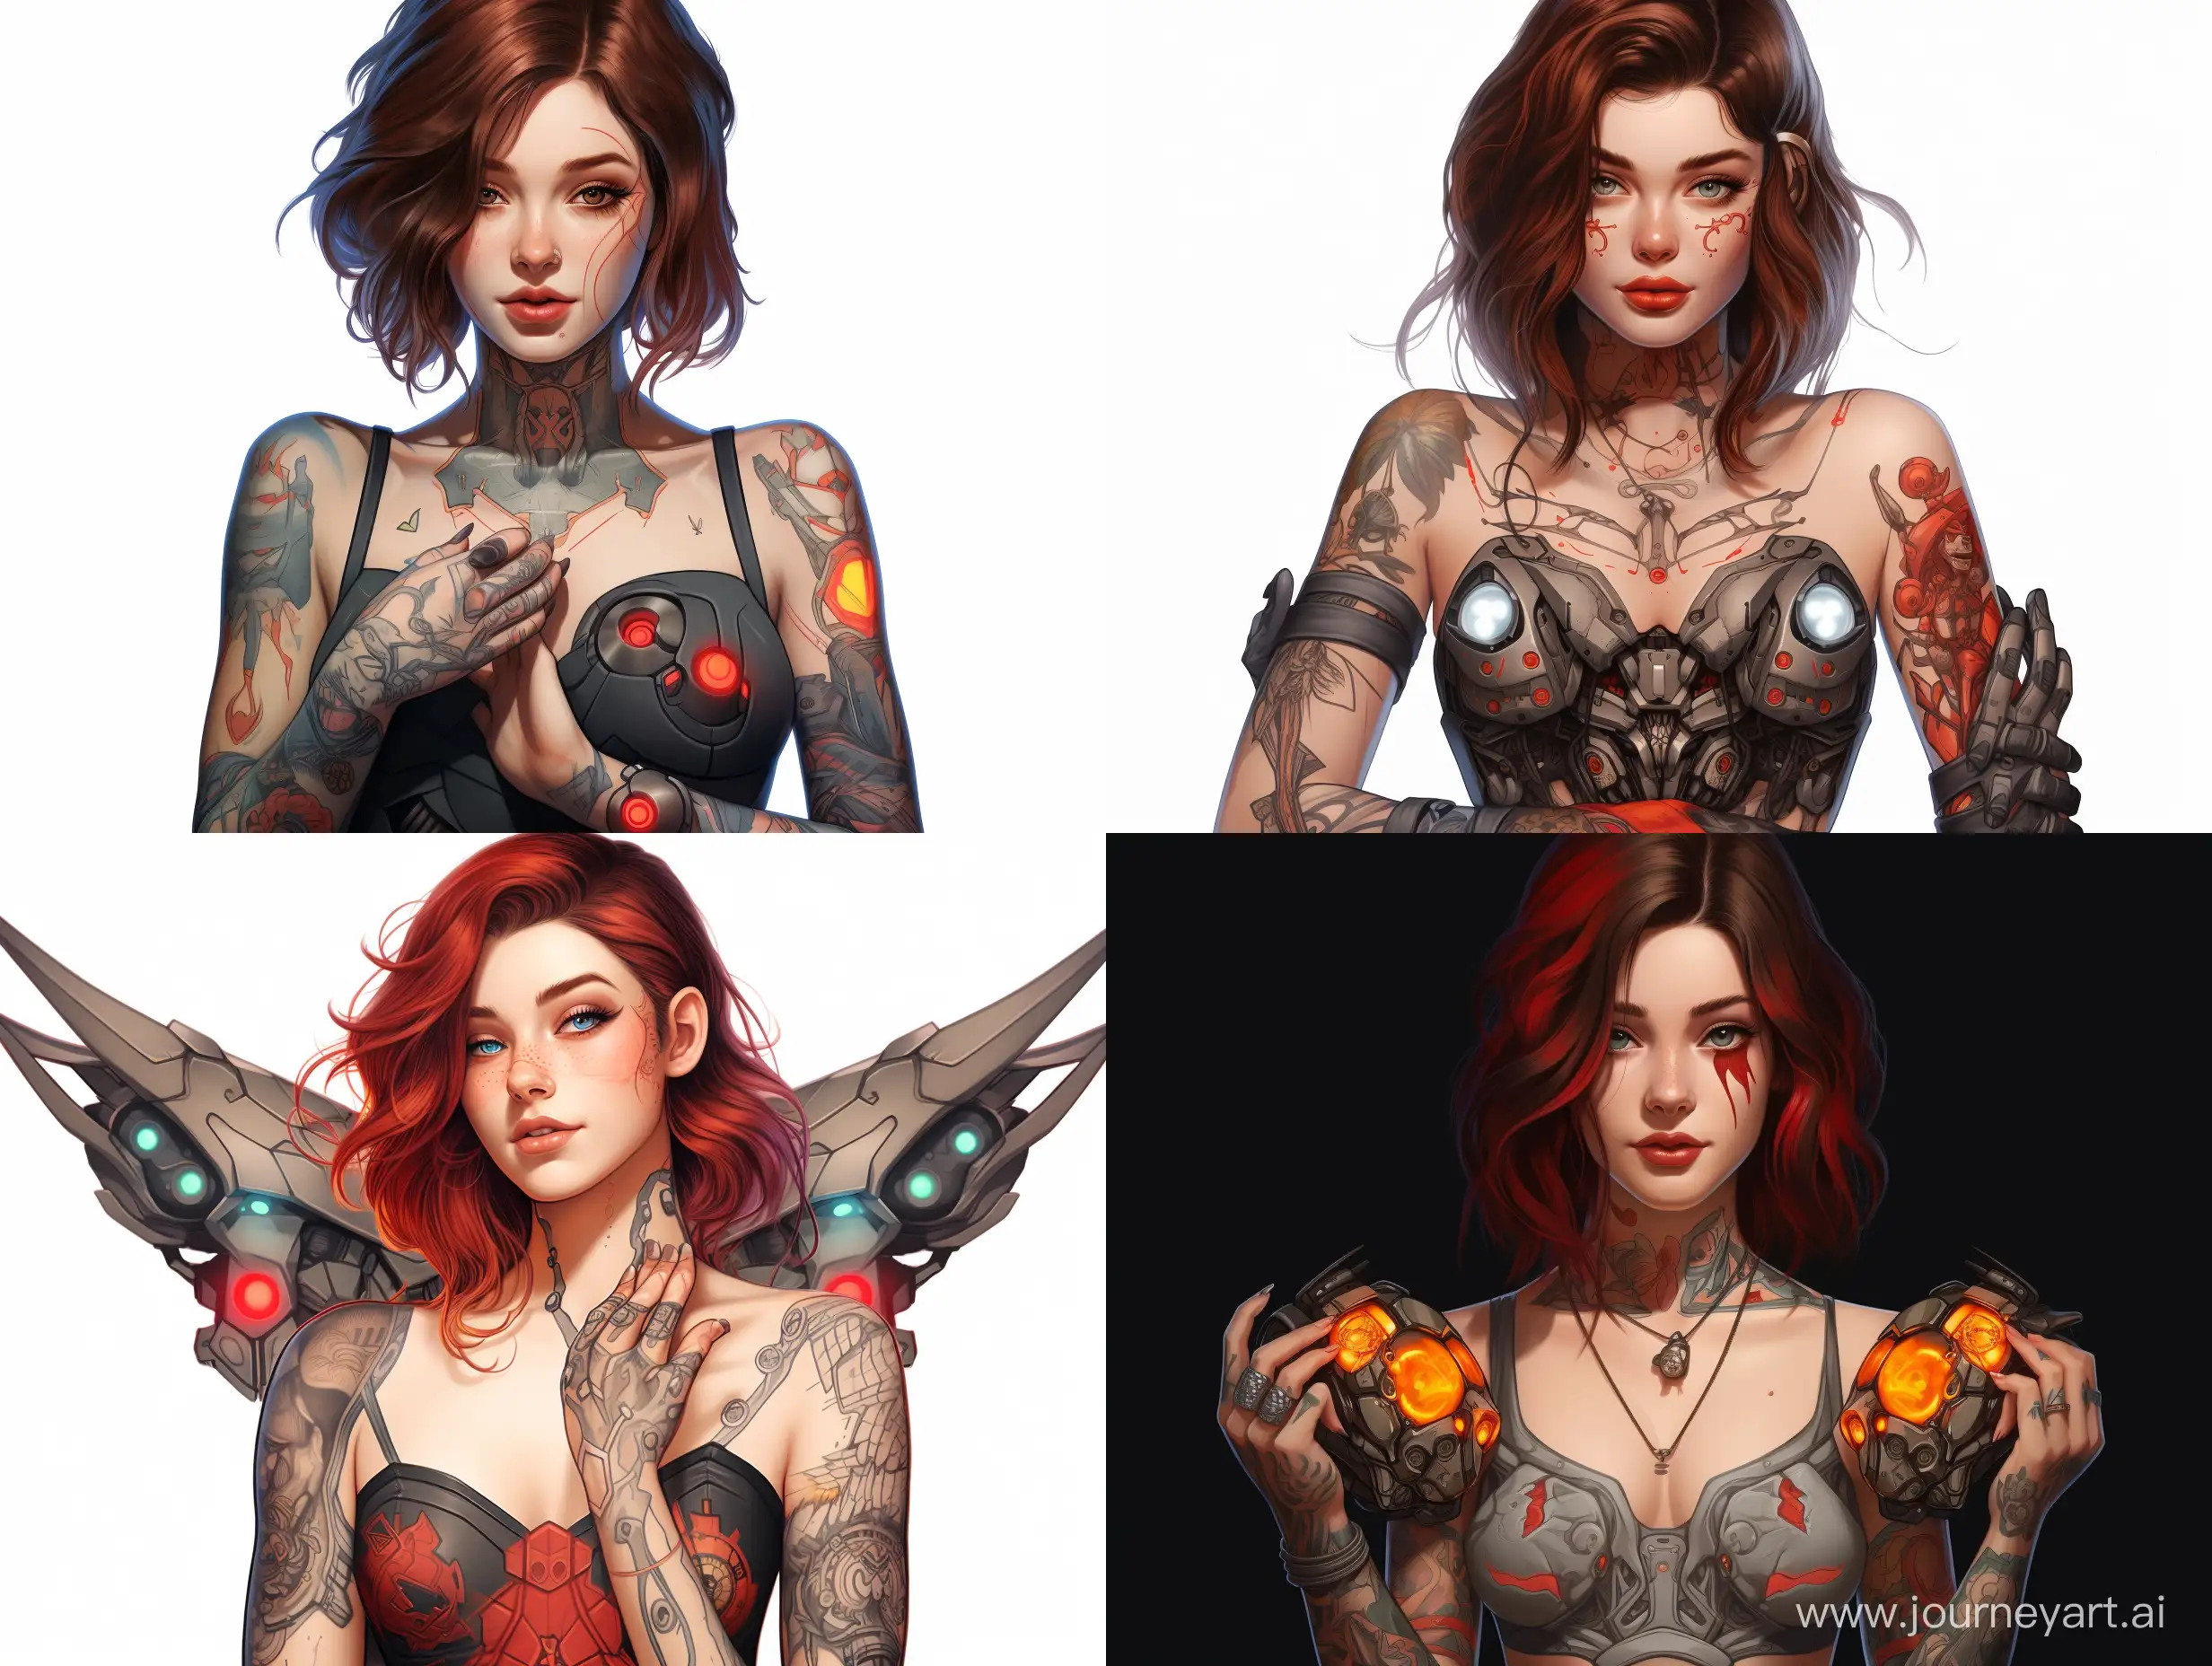 Charming-Cyberpunk-Robot-Girl-with-Red-Moth-Tattoo-and-Tattoo-Machine